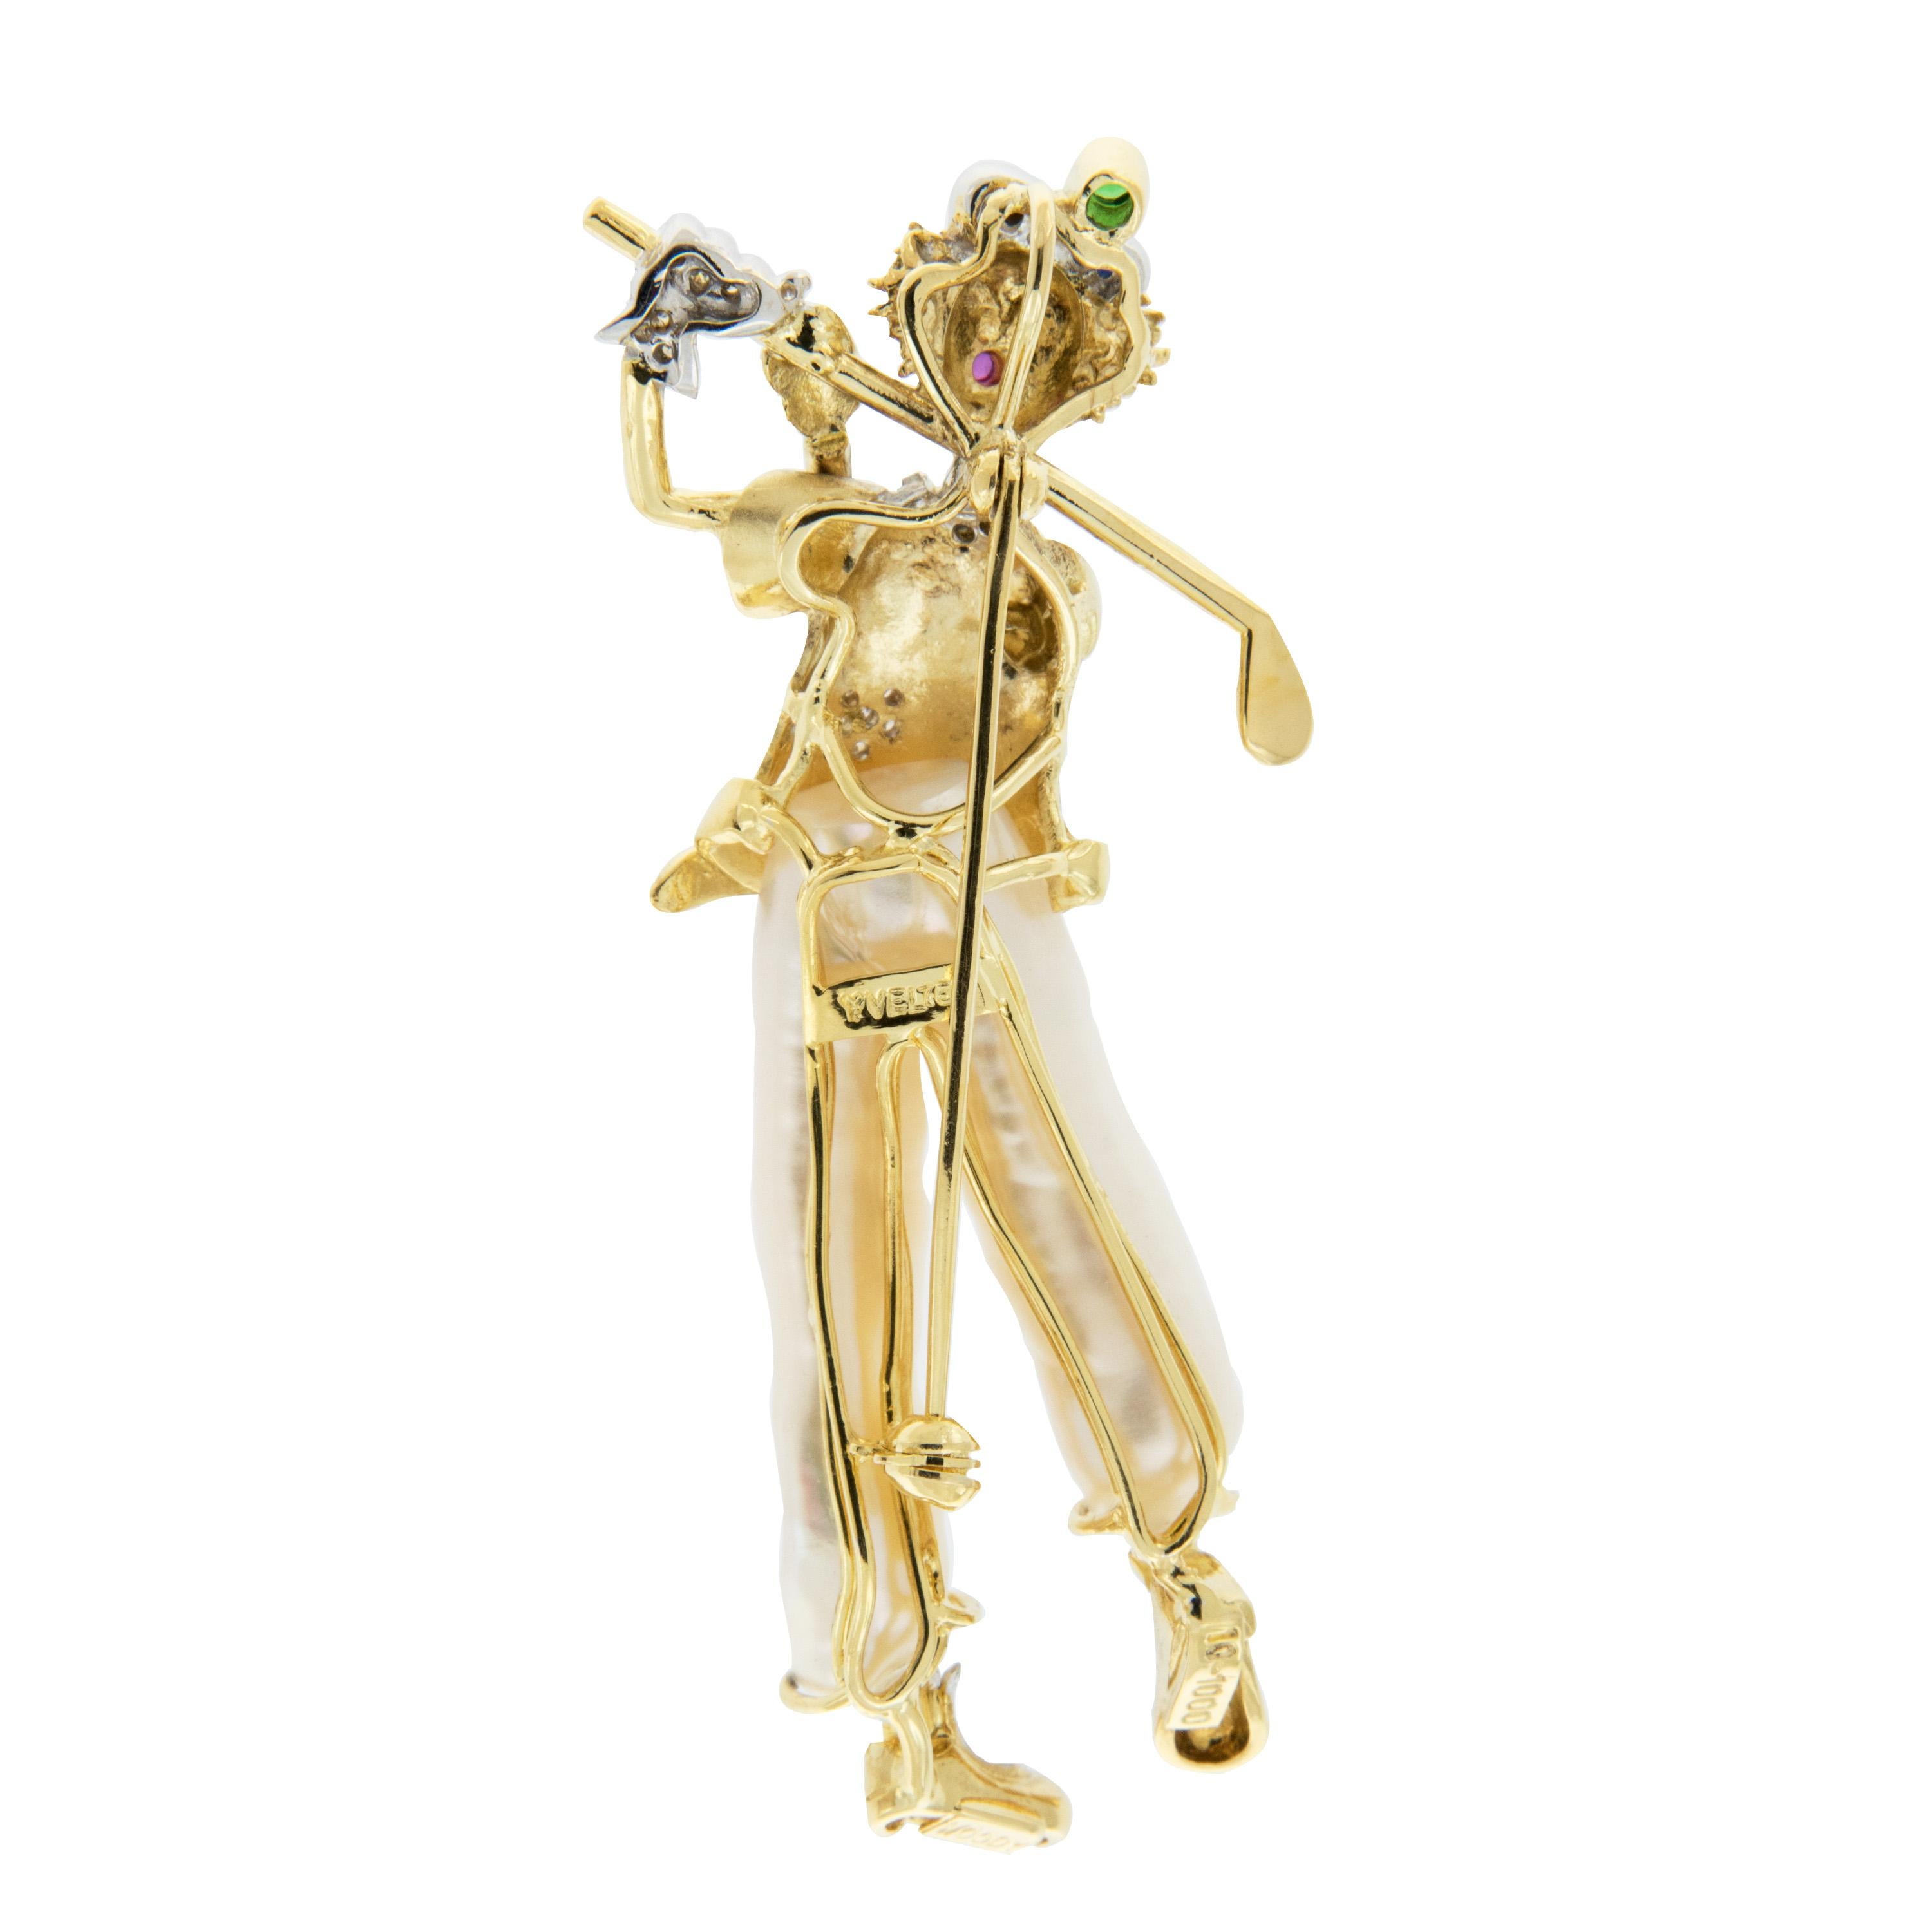 This charming pin is beautifully crafted in 18k yellow and white gold. The golfing clown is wearing freshwater pearl pants and diamonds on his shoes, glove, shirt and belt. Accented by twinkling ruby, sapphire and emerald stones. Marked YVEL. Weighs